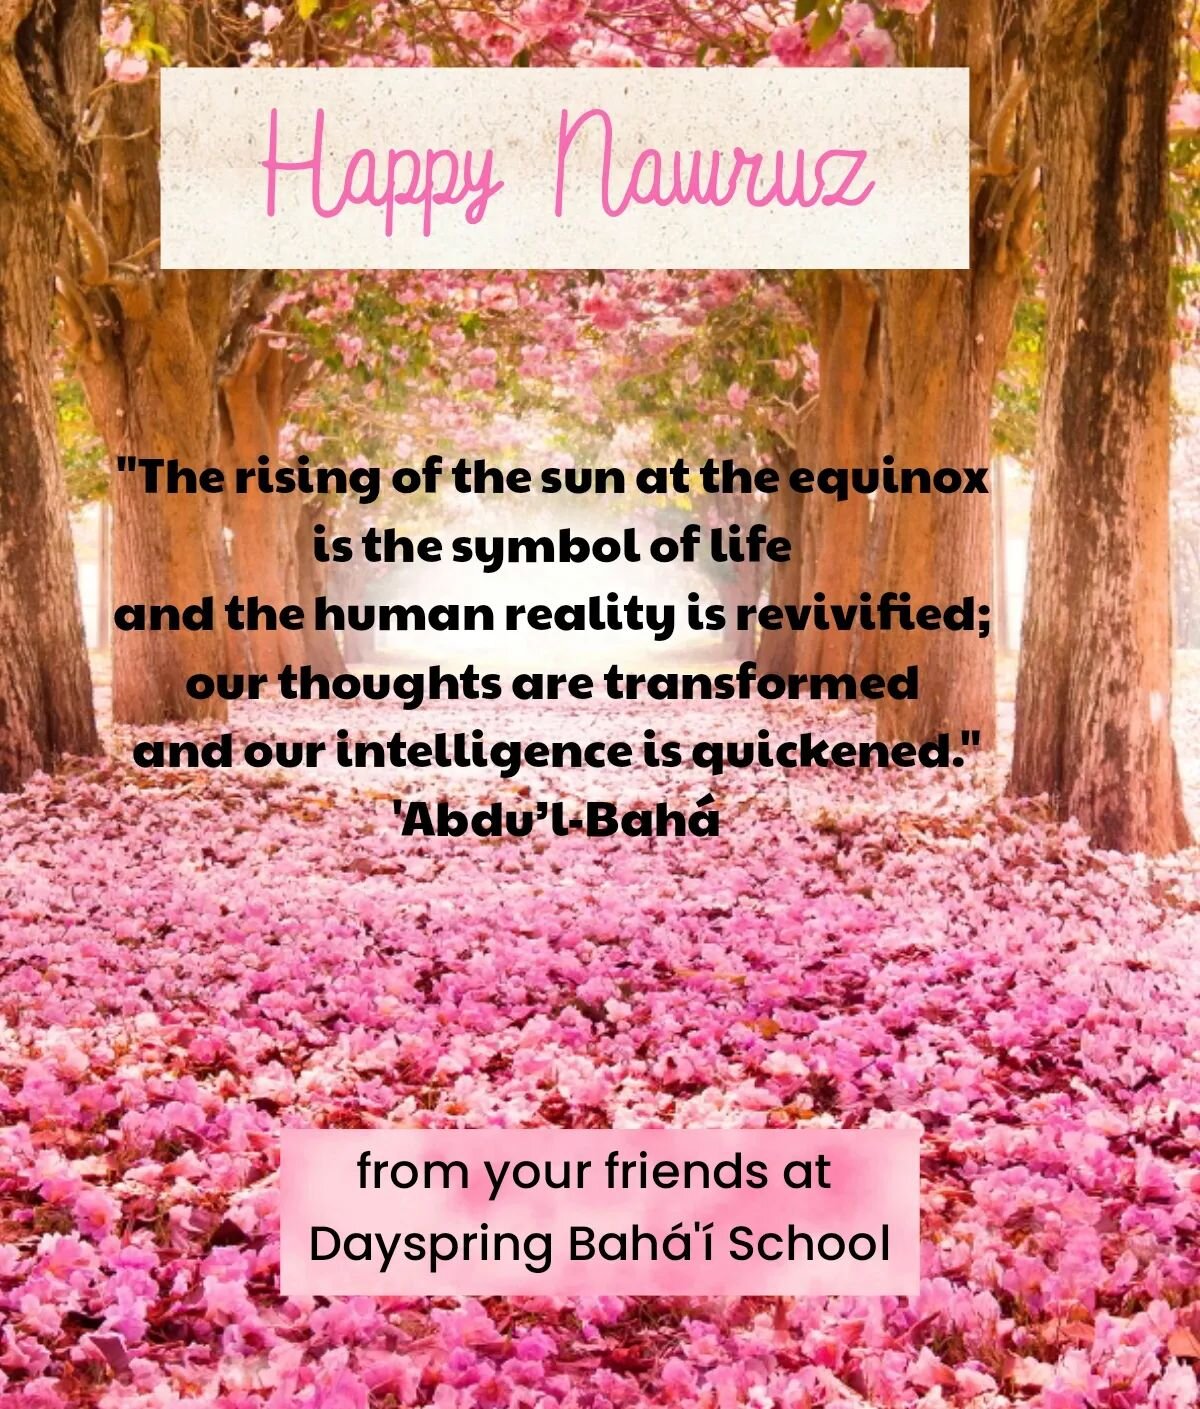 Happy Nawruz to one and all! 

Best gift for the New Year?

Making plans to come to Dayspring from June 30th - July 3rd!